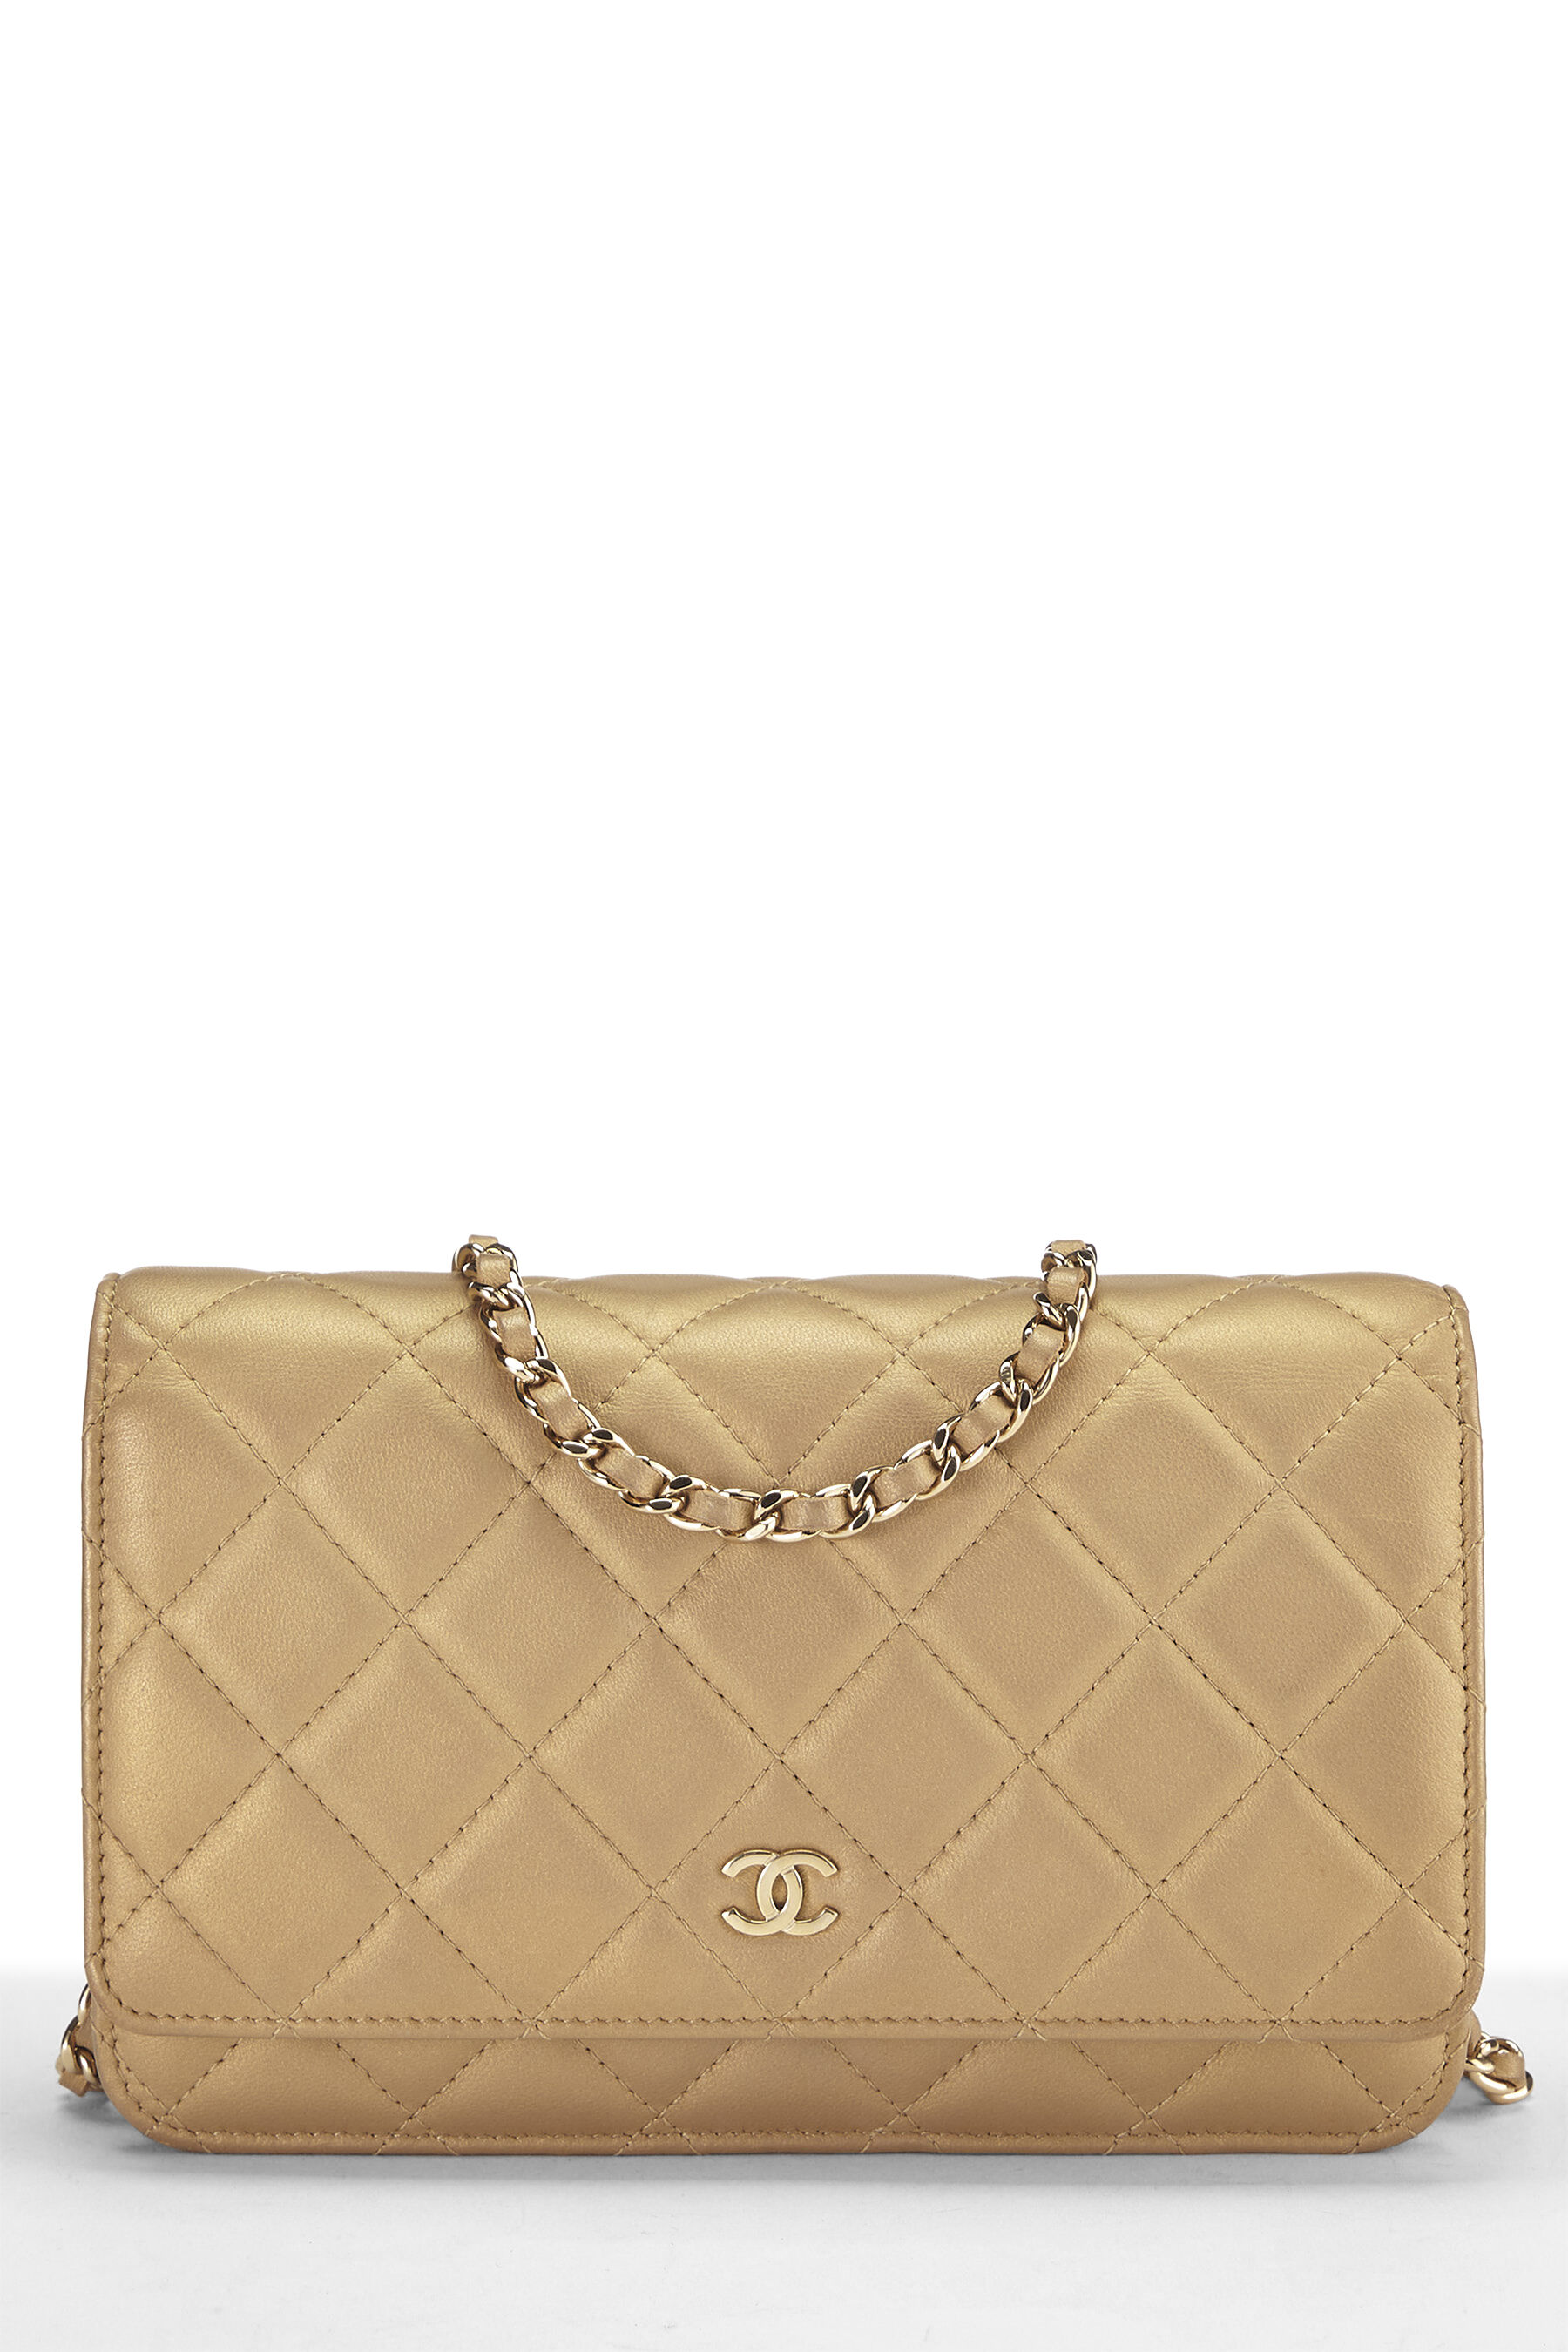 Chanel Classic Wallet-On-Chain